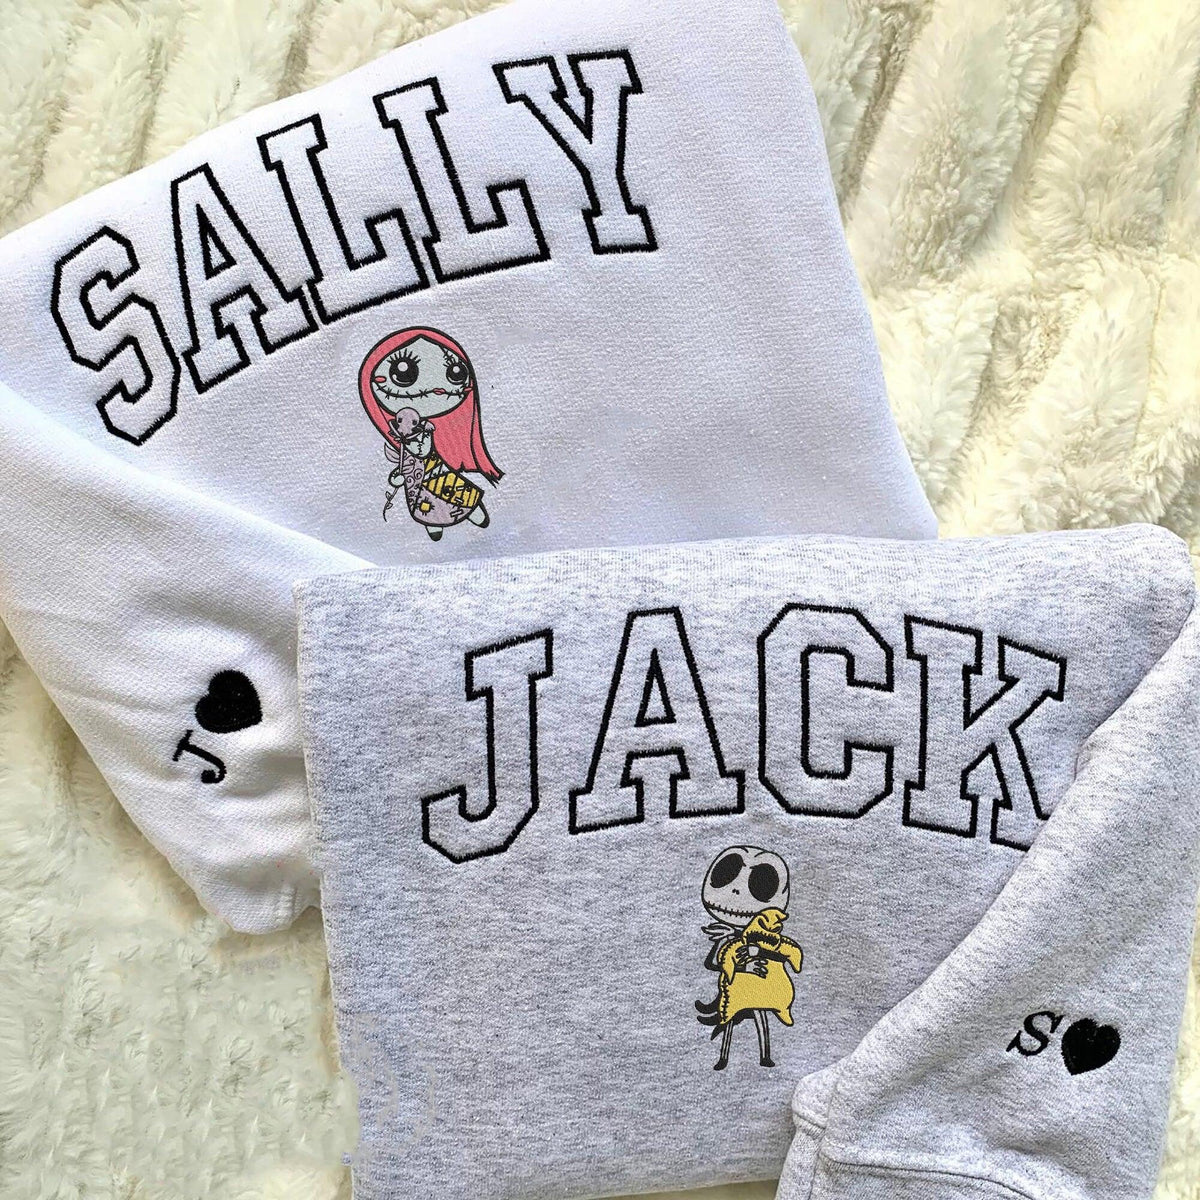 Custom Embroidered Hoodies For Couples, Custom Matching Couple Hoodies, Jack And Sally Couples Vintage Embroidered Crewneck Hoodie